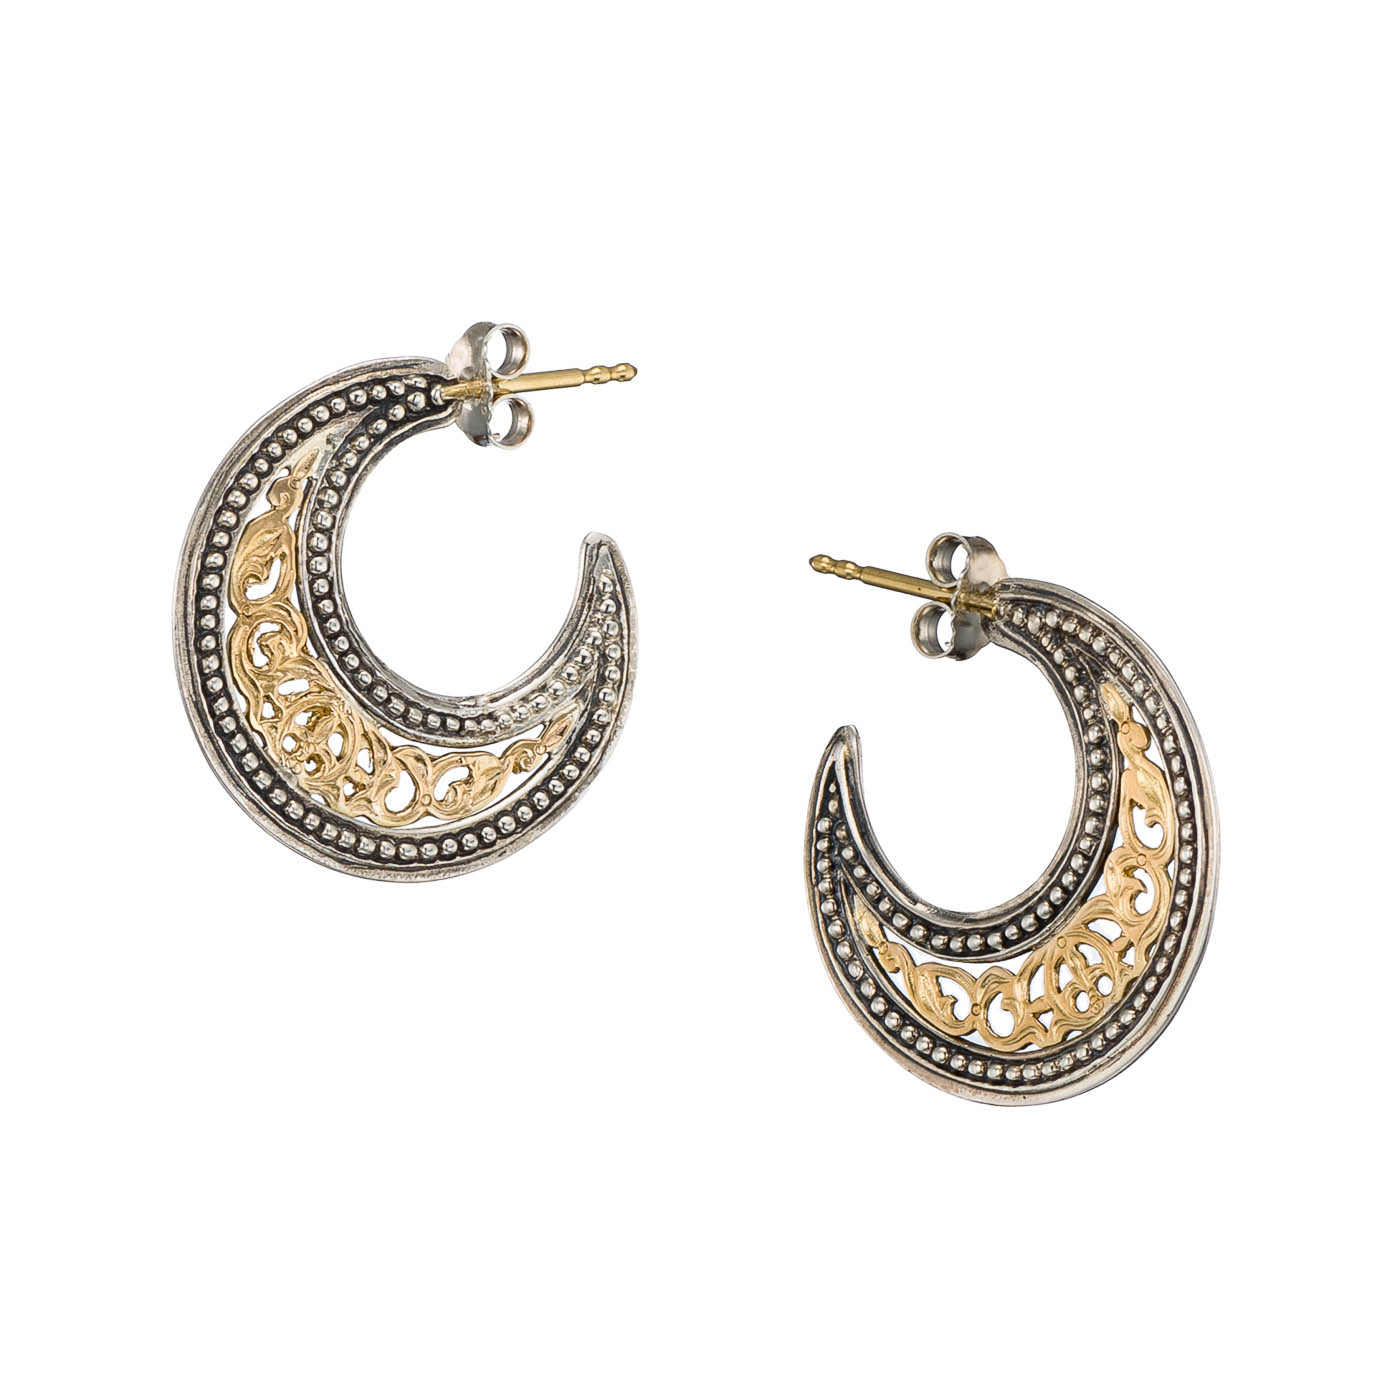 Garden Shadows small Hoops Earrings in 18K Gold and Sterling Silver